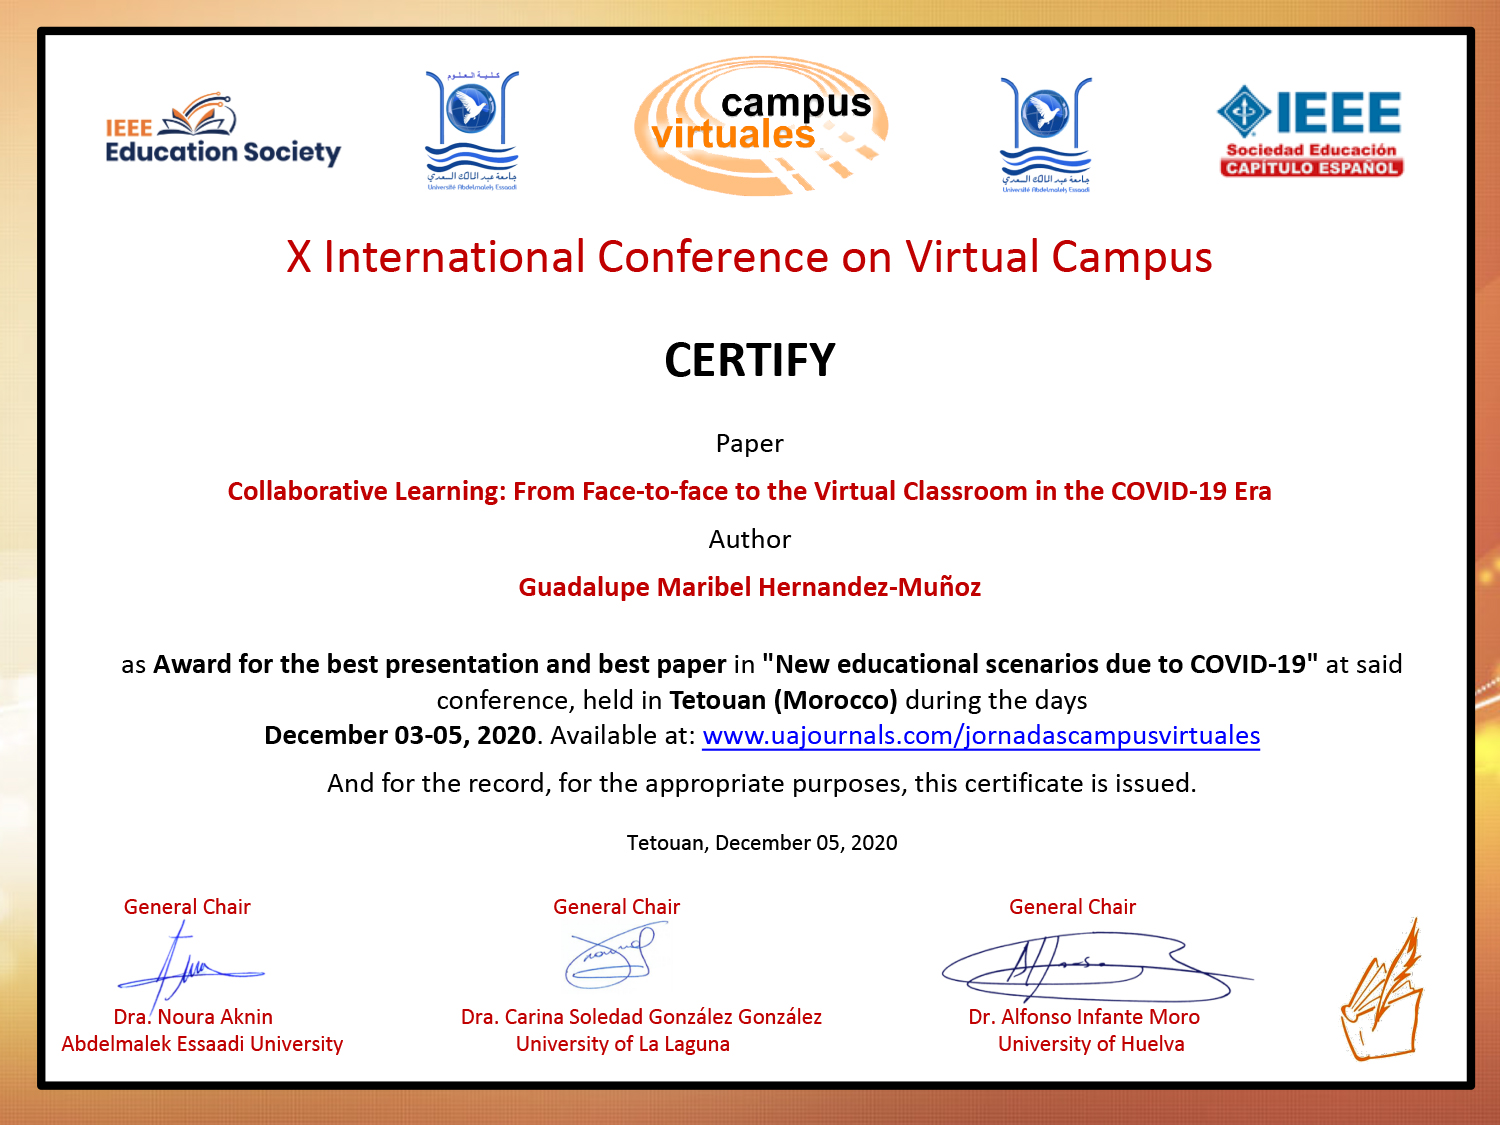 X International Conference on Virtual Campus